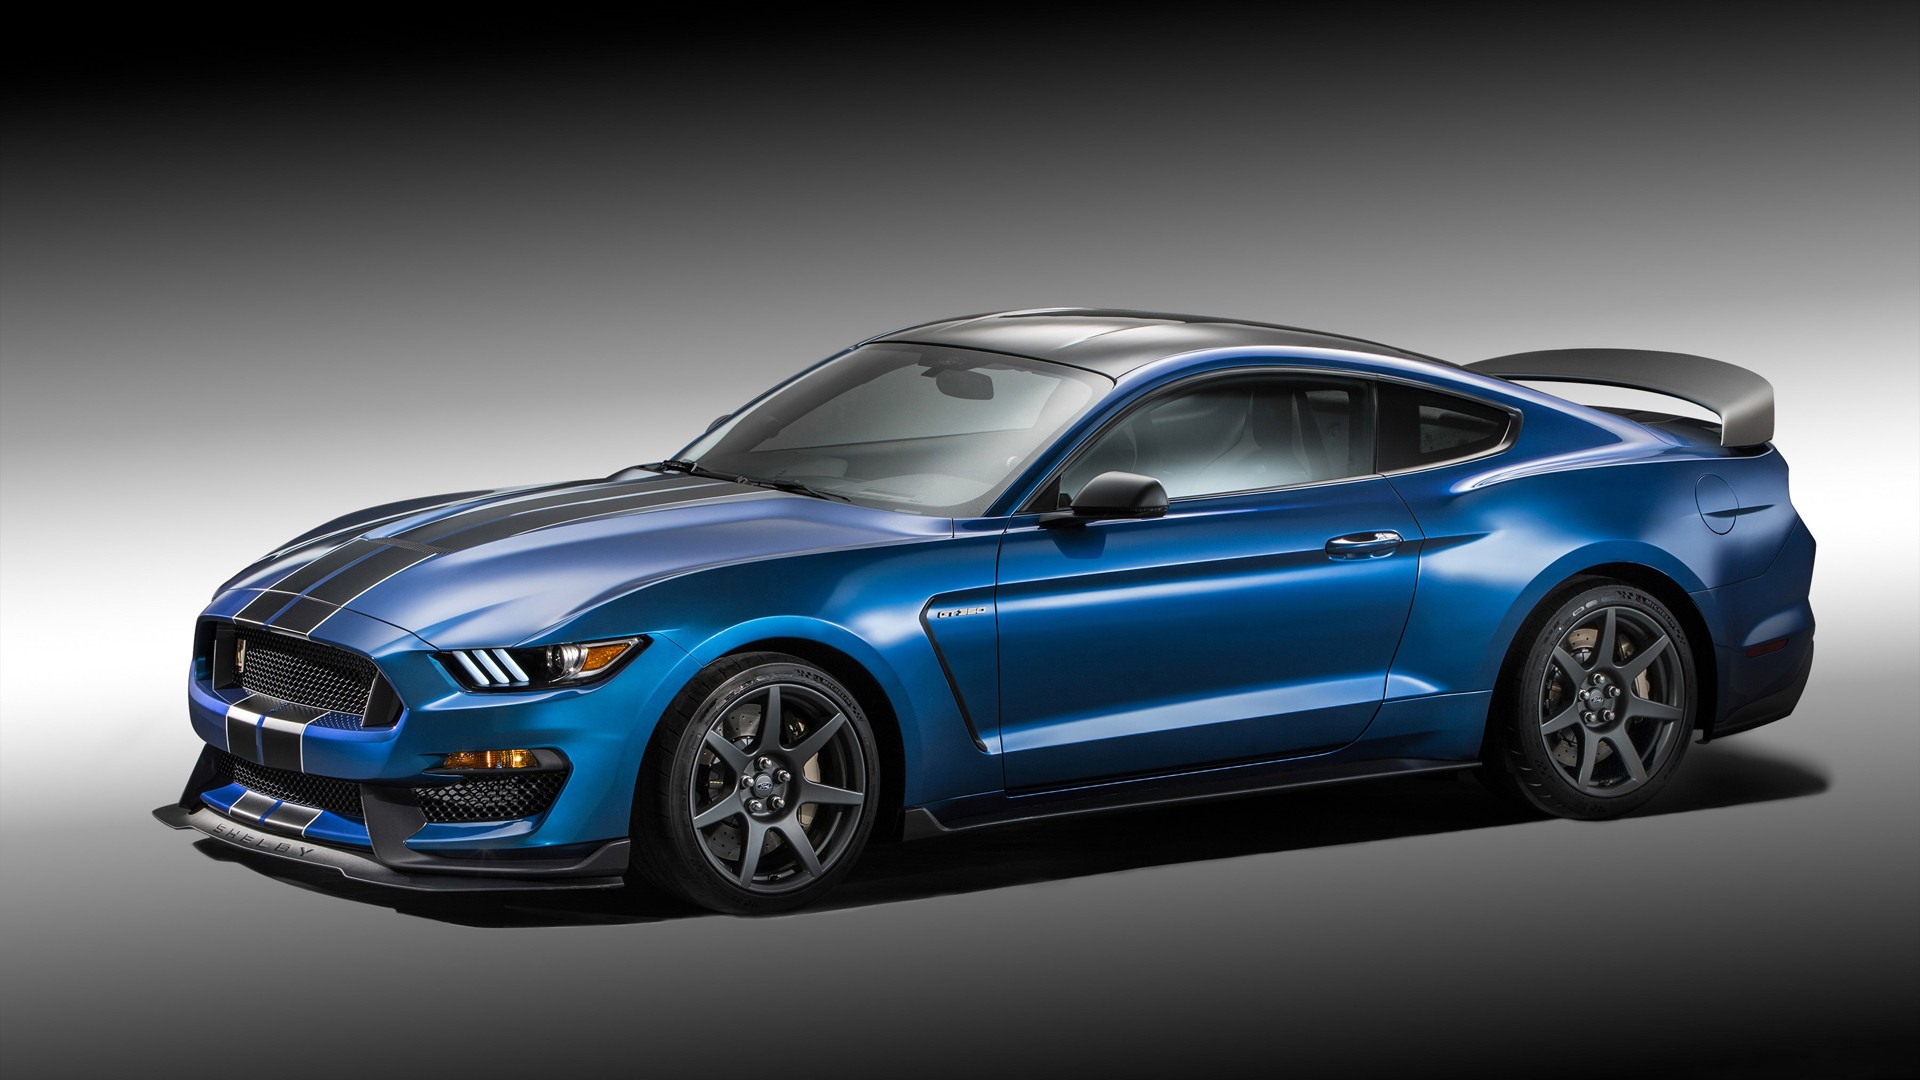 Ford Mustang Shelby, Shelby GT350, Car, Blue Cars Wallpaper